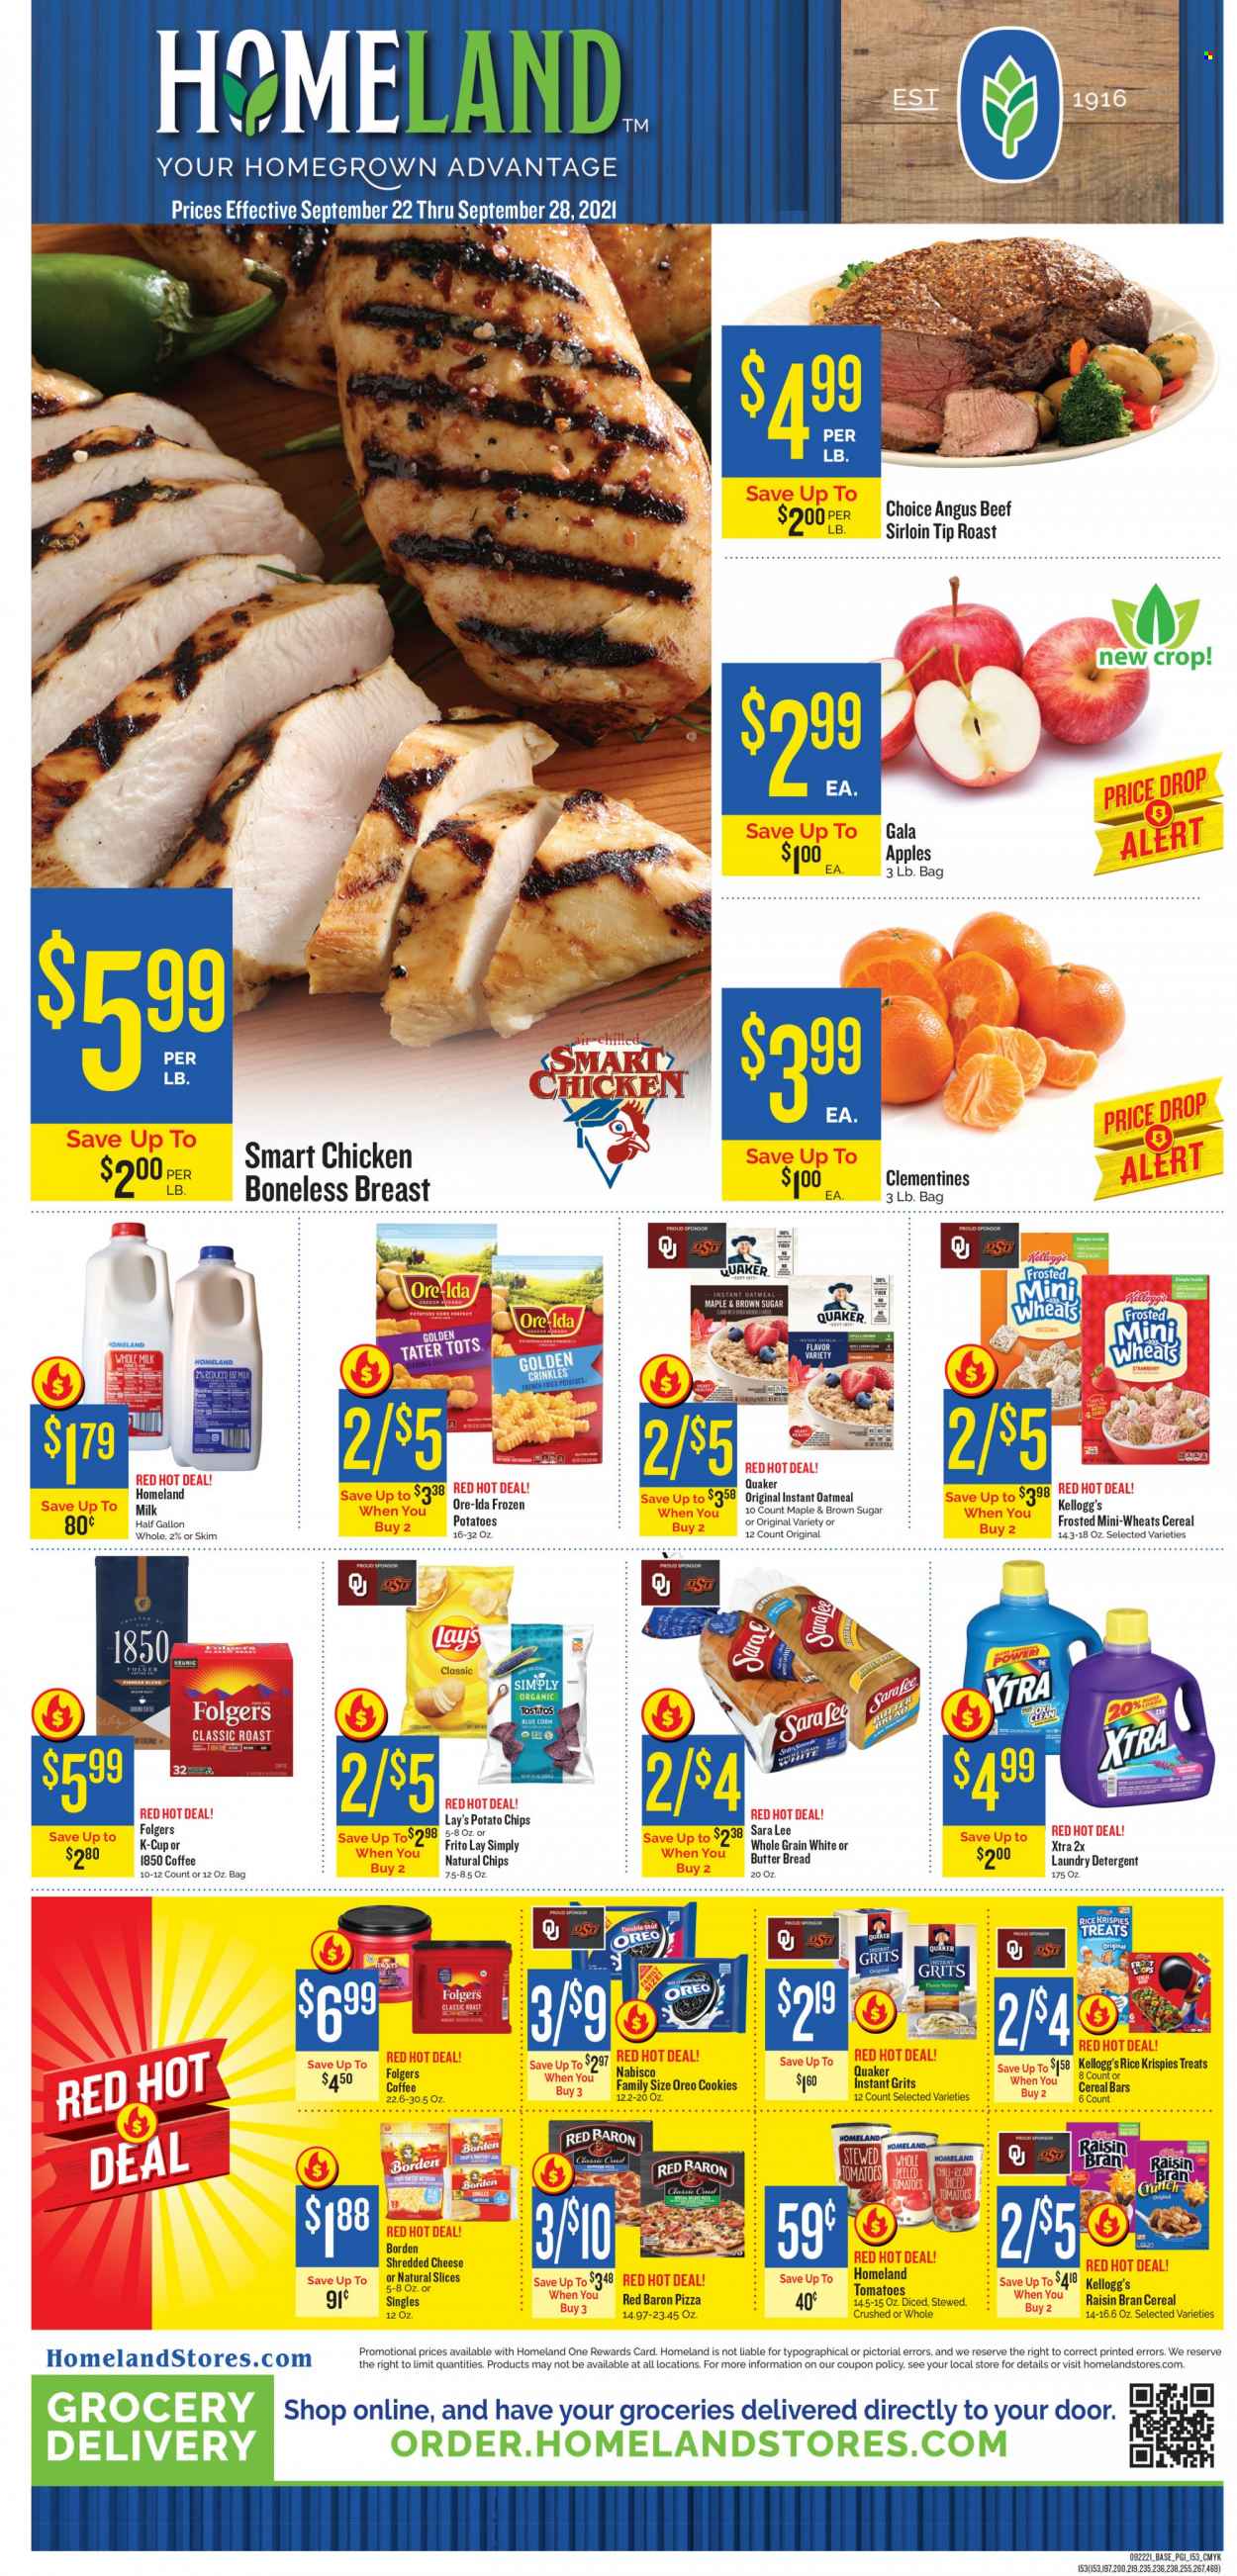 thumbnail - Homeland Flyer - 09/22/2021 - 09/28/2021 - Sales products - bread, Sara Lee, corn, apples, Gala, pizza, Quaker, Monterey Jack cheese, shredded cheese, Oreo, milk, Ore-Ida, tater tots, Red Baron, cookies, cereal bar, Kellogg's, potato chips, Lay’s, Tostitos, oatmeal, grits, Rice Krispies, Raisin Bran, coffee, Folgers, coffee capsules, K-Cups, beef meat, beef sirloin, detergent, laundry detergent, XTRA, clementines. Page 1.